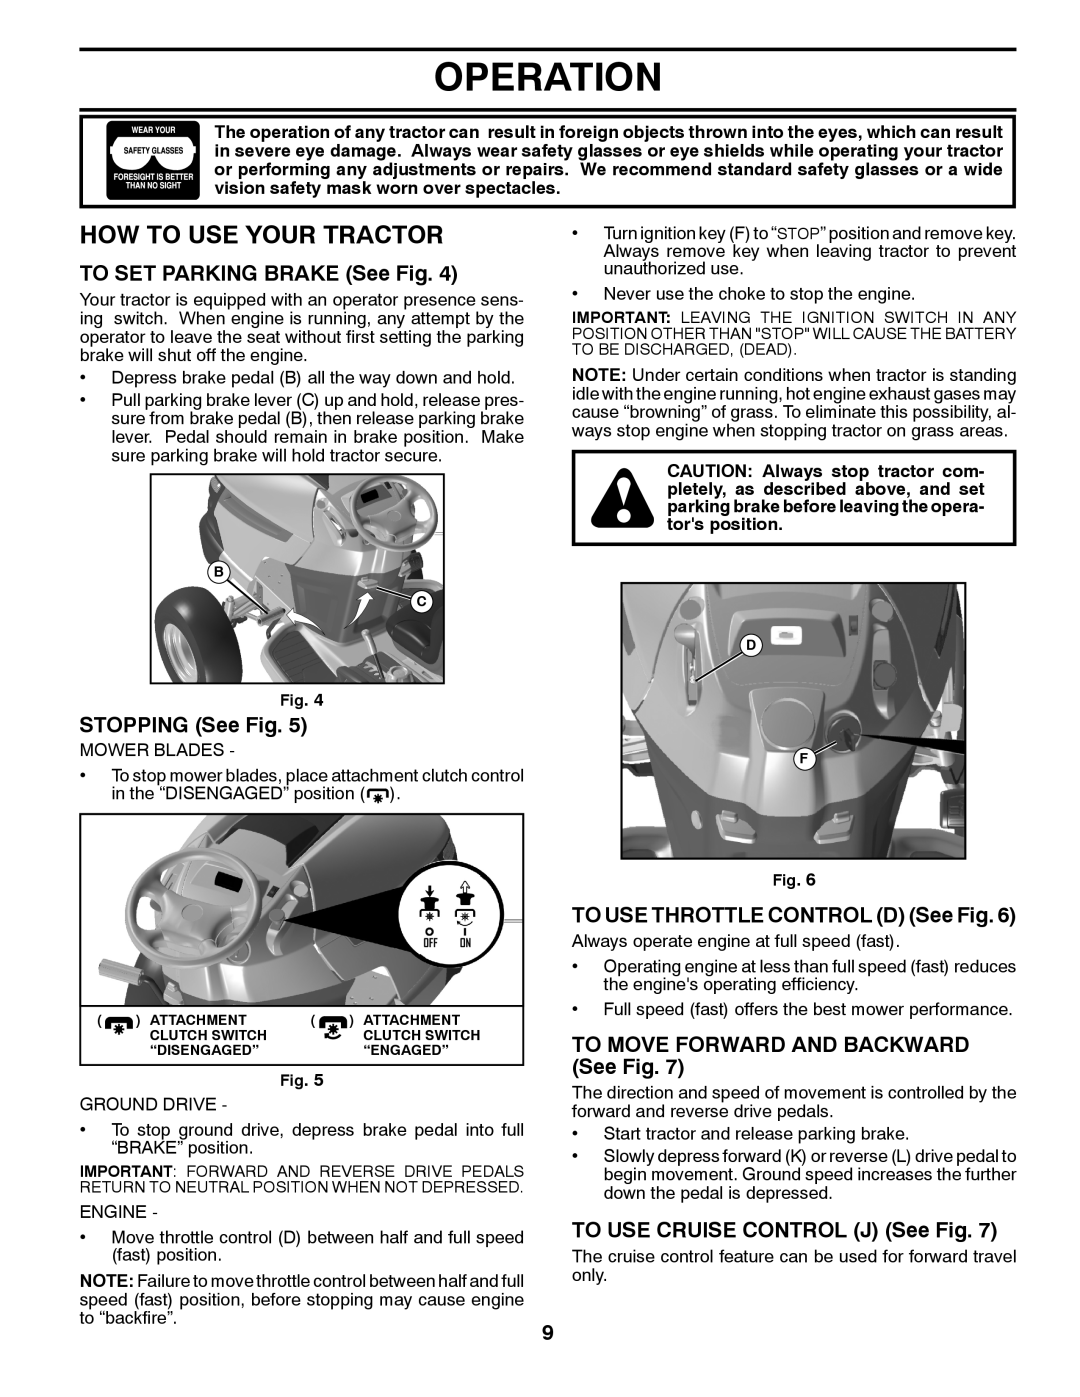 Husqvarna 532 44 05-66, 96045003000 How To Use Your Tractor, TO SET PARKING BRAKE See Fig, STOPPING See Fig, Operation 